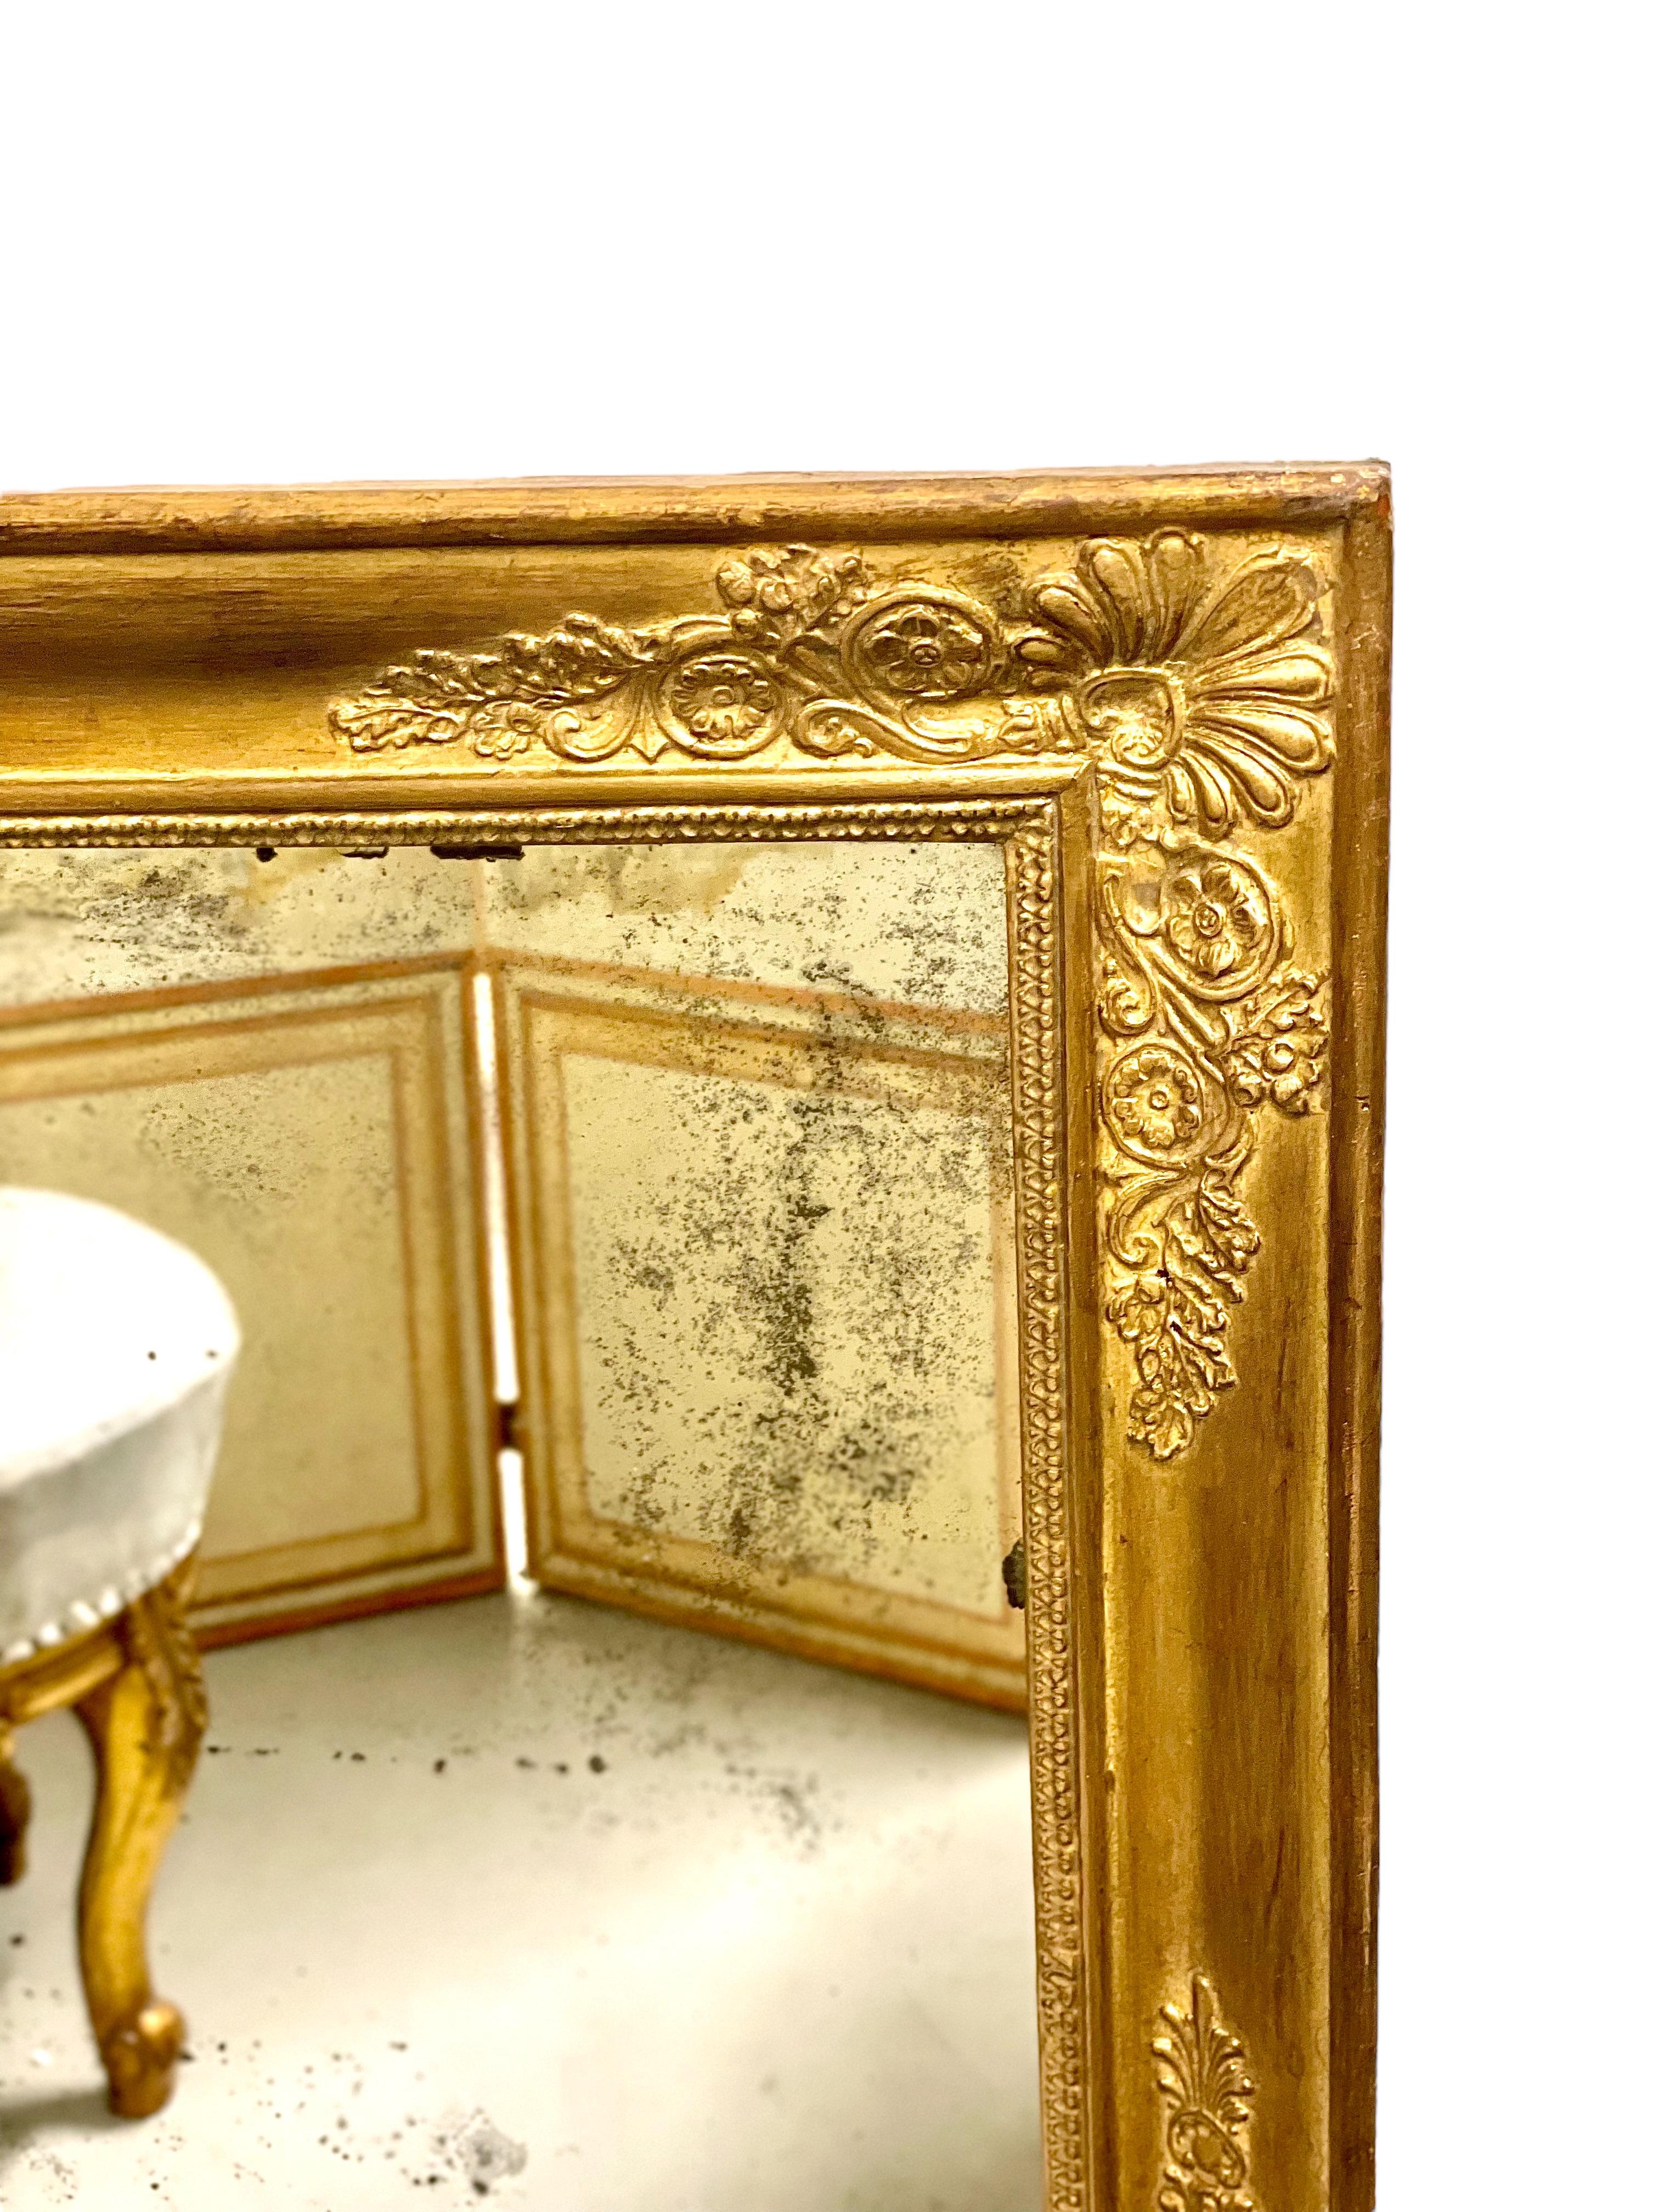 Beautiful antique rectangular mirror from the French Restoration period, in a wood and gilded stucco frame. Each corner is adorned with a moulded palmette and floral flourish, while the four sides of the frame display a frieze of water leaves,